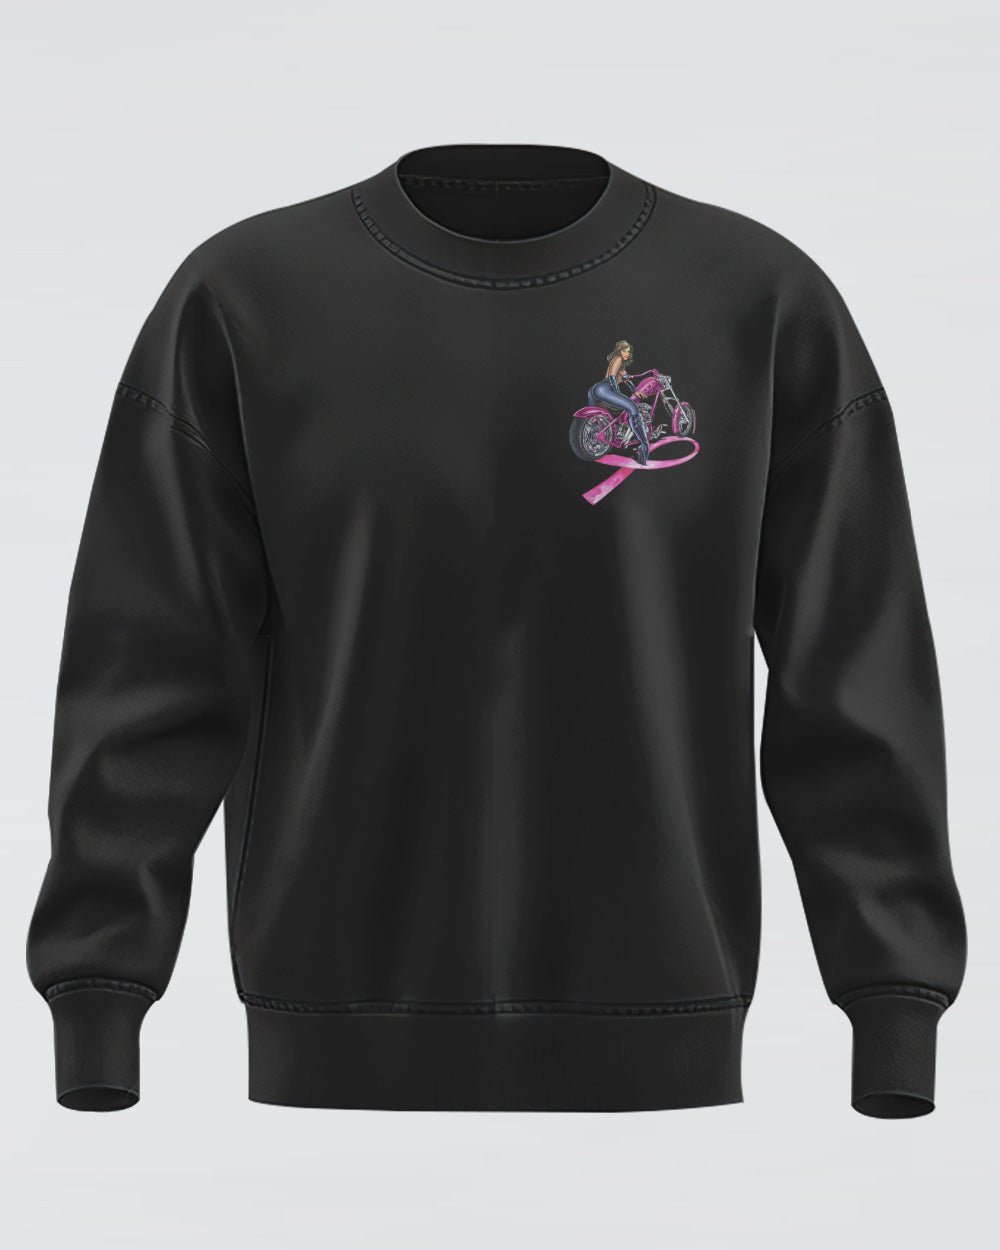 Bikers Fight For A Cure Women's Breast Cancer Awareness Sweatshirt